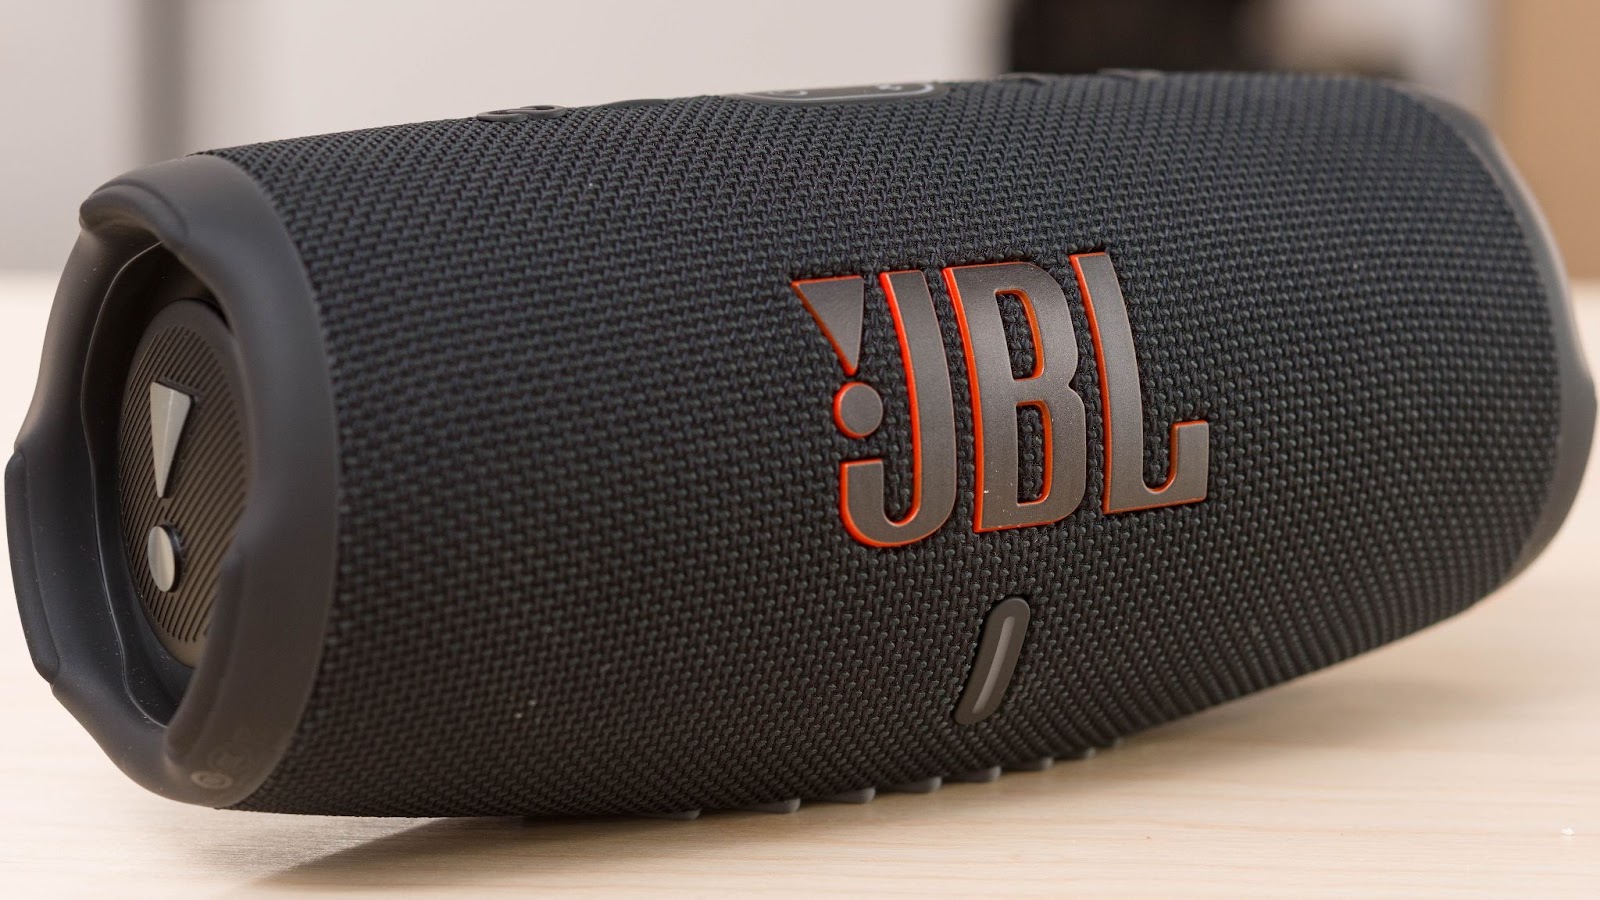 How Can I Track My JBL Flip 5 if Lost or Stolen